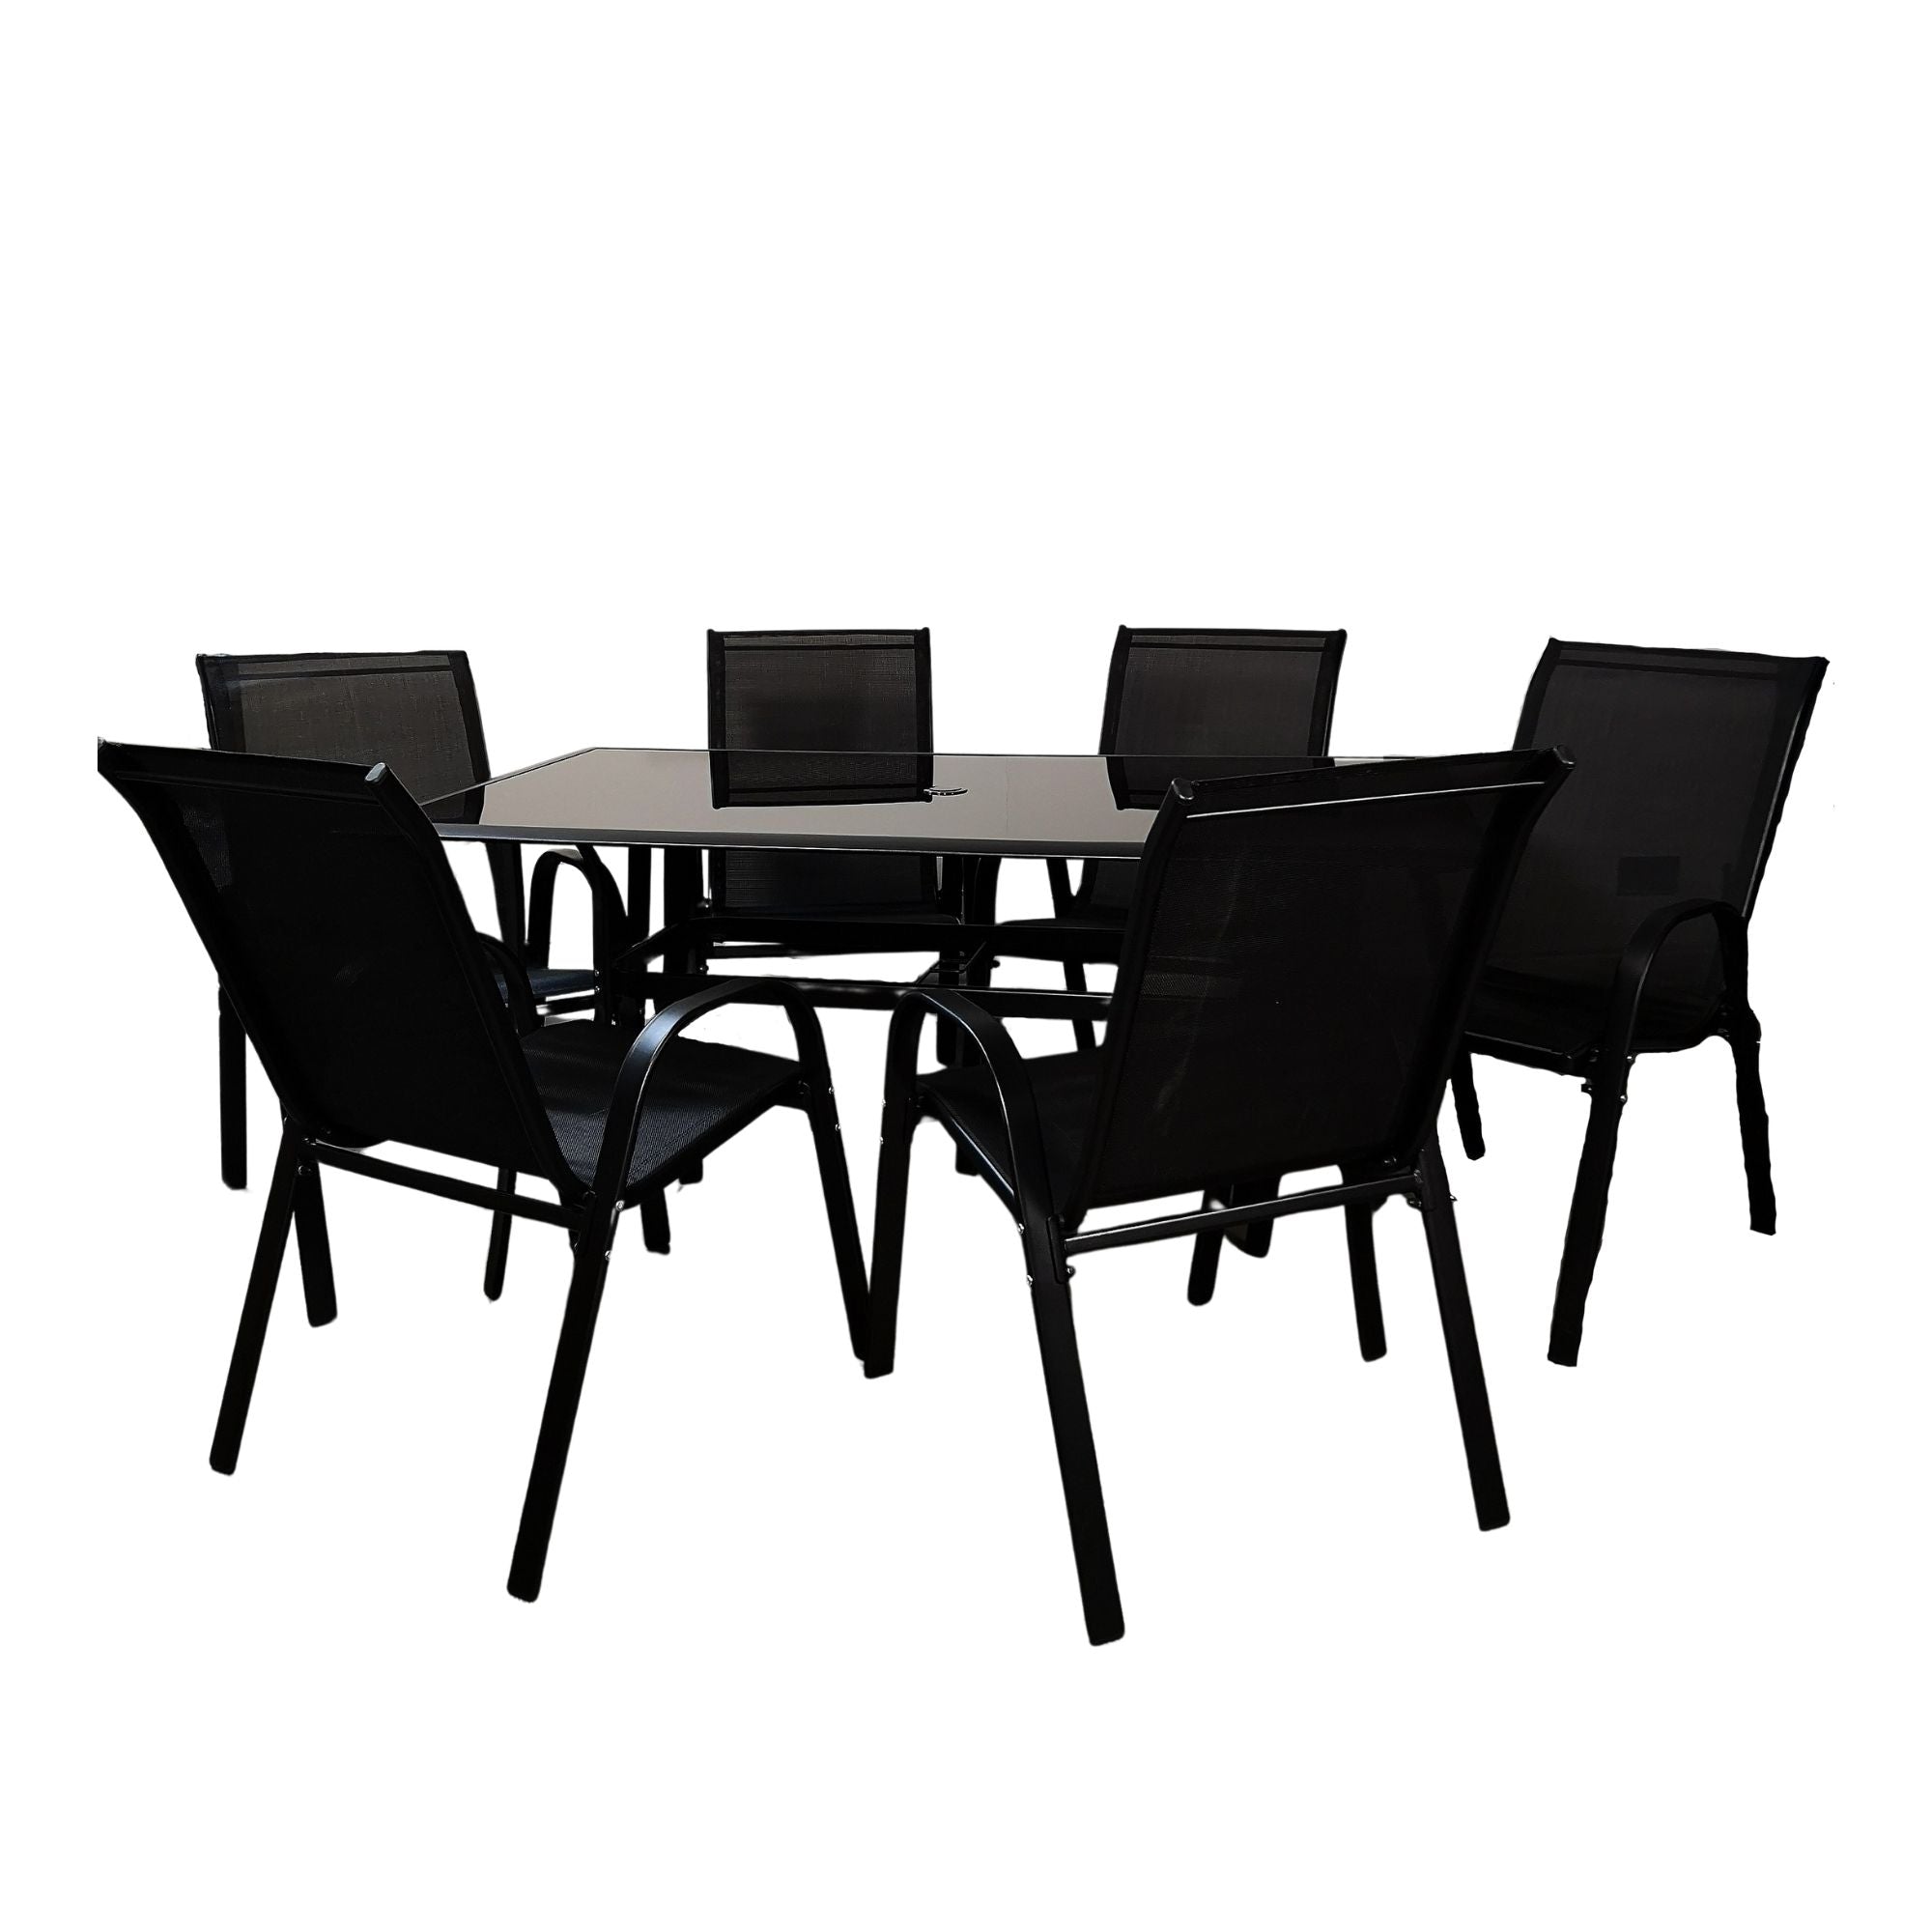 Outdoor 6 Person Rectangular Glass Top Garden Patio Dining Table Chairs Set